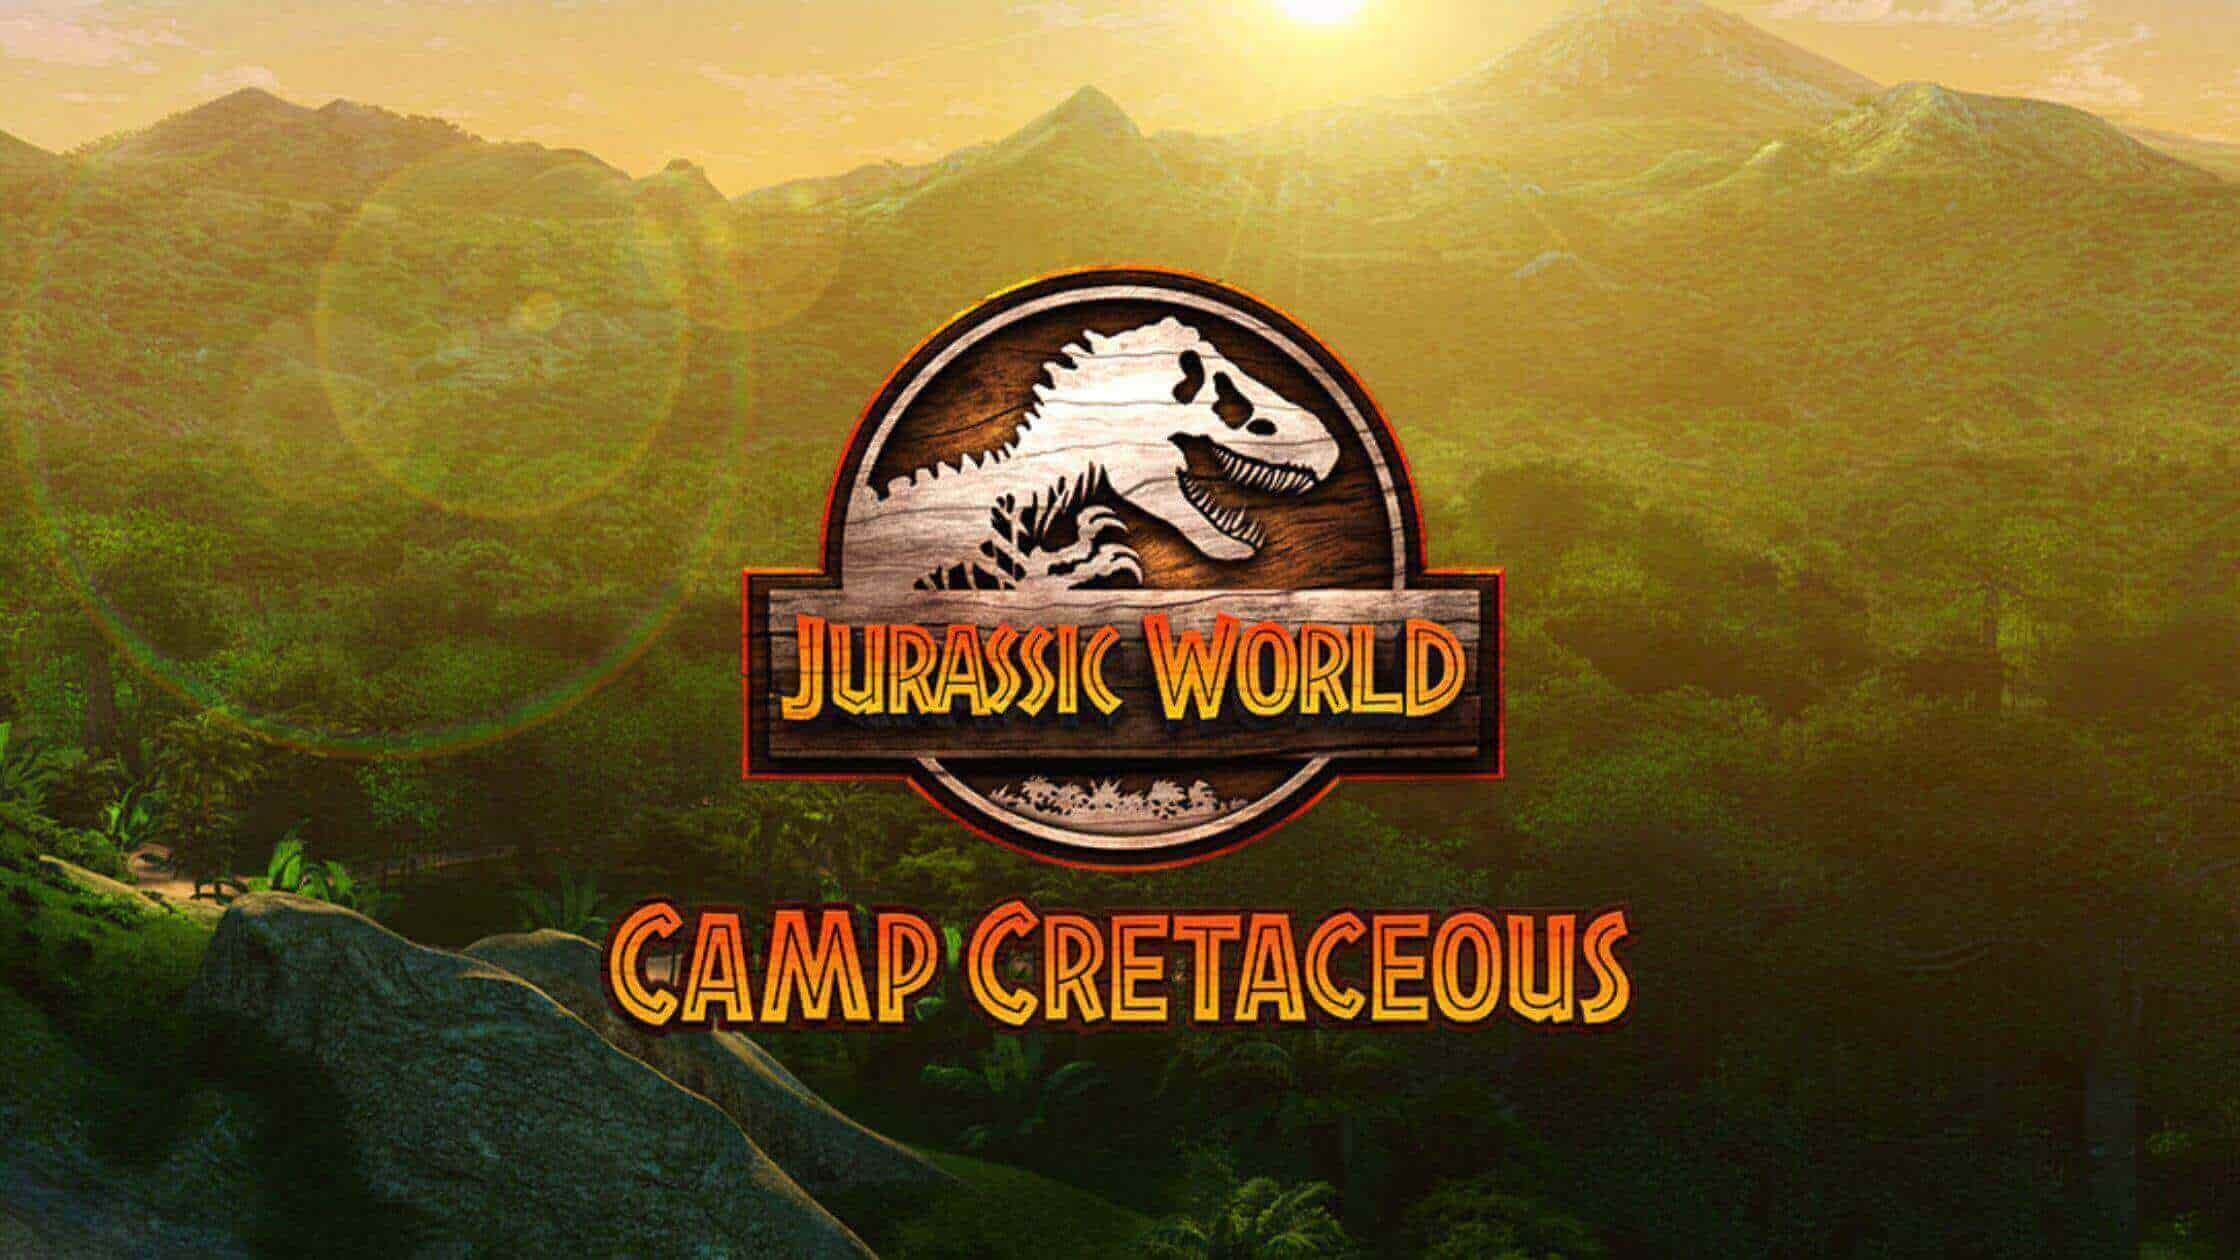 Jurassic World Camp Cretaceous with its New Season